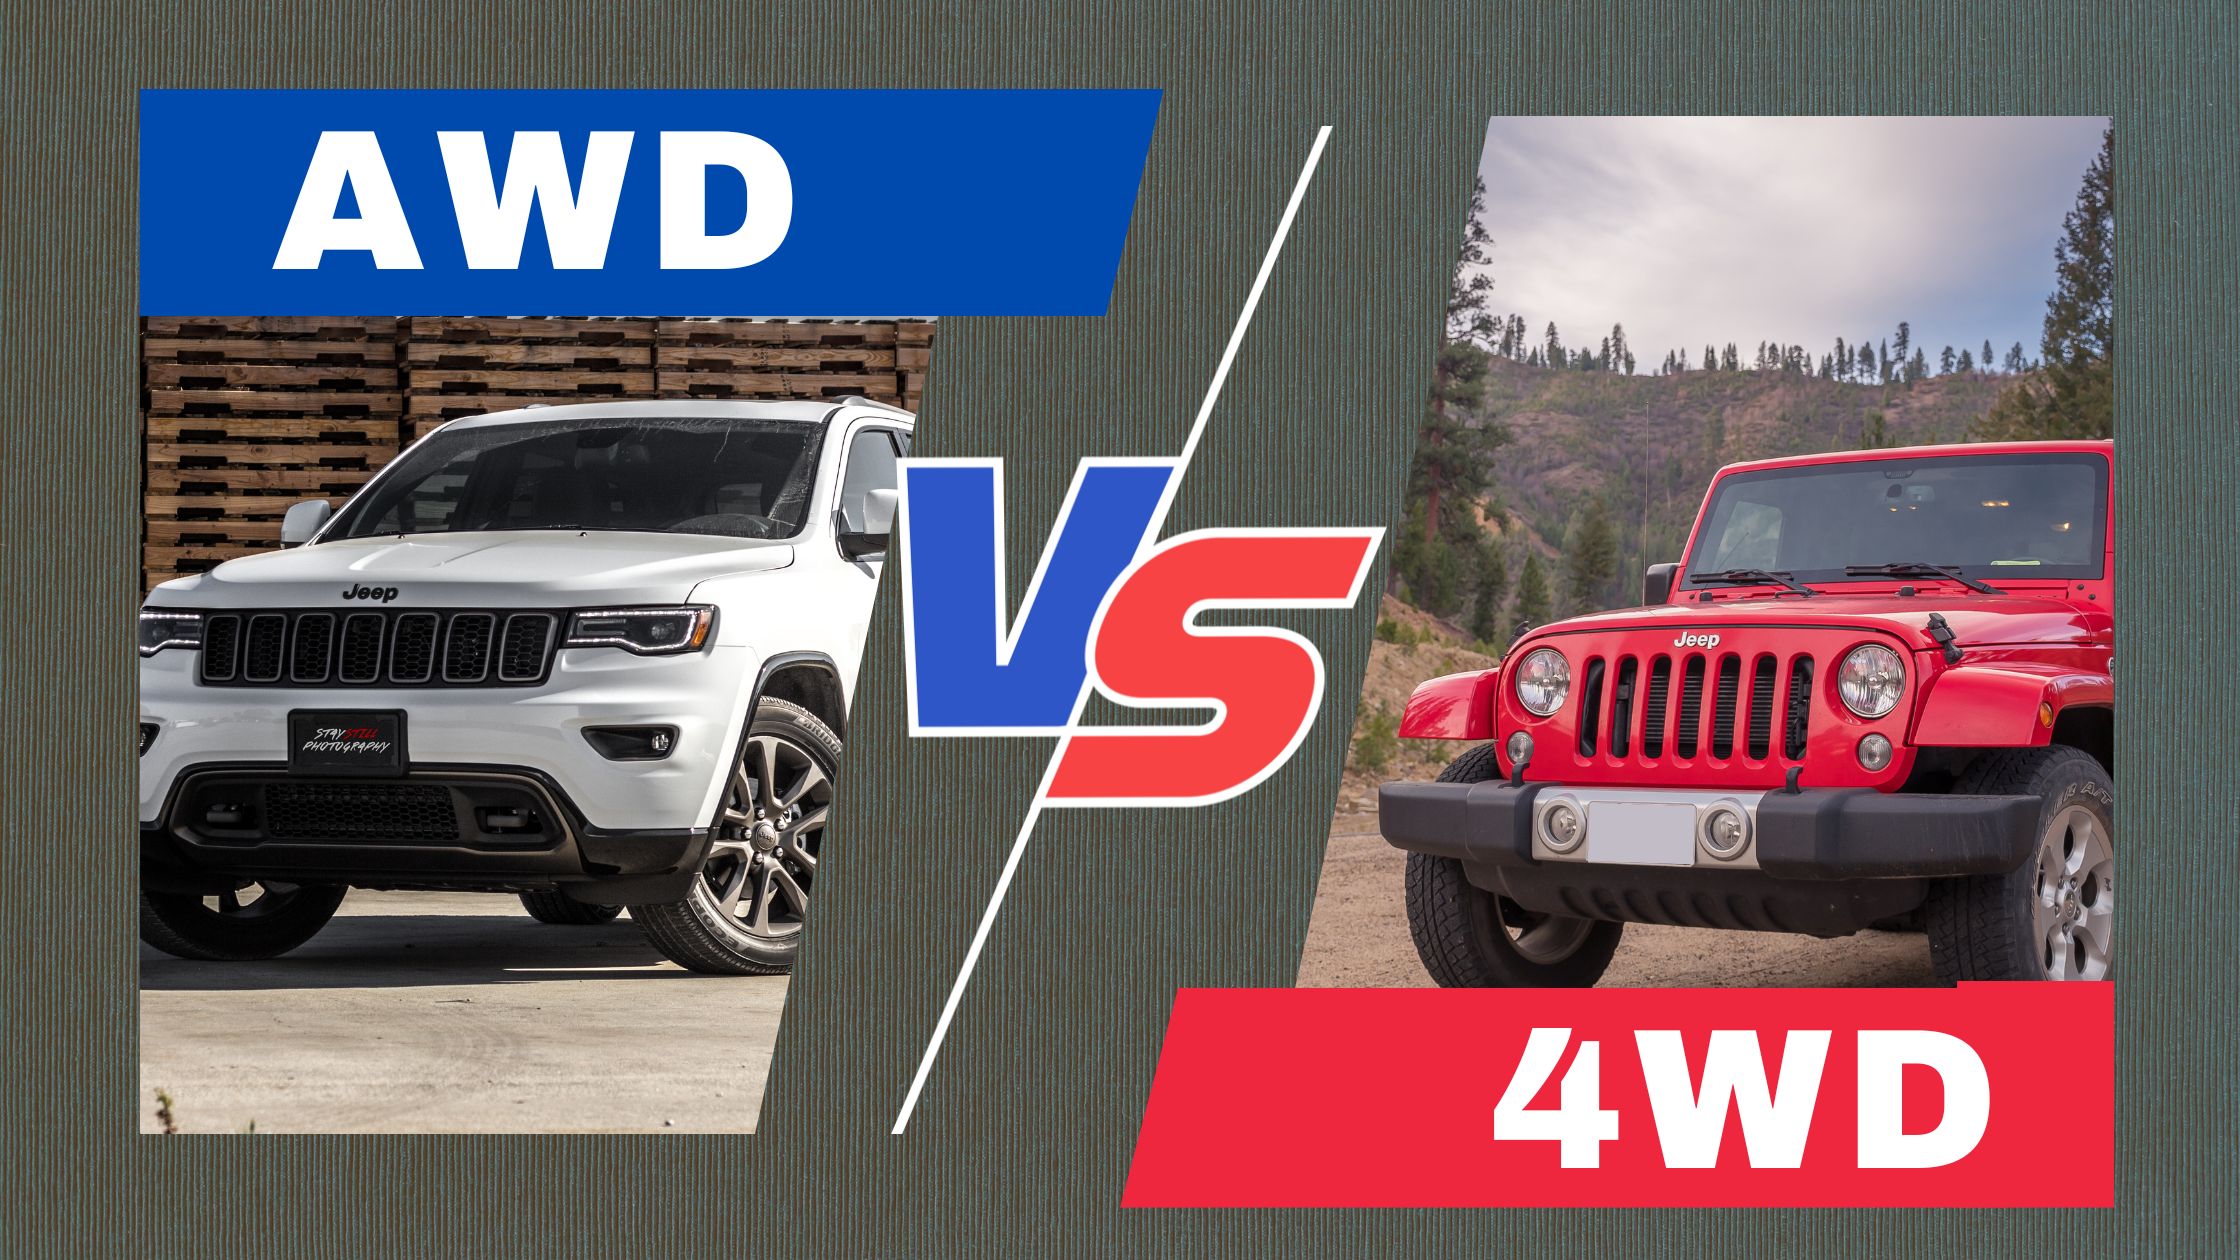 4WD vs AWD: What’s The Difference?